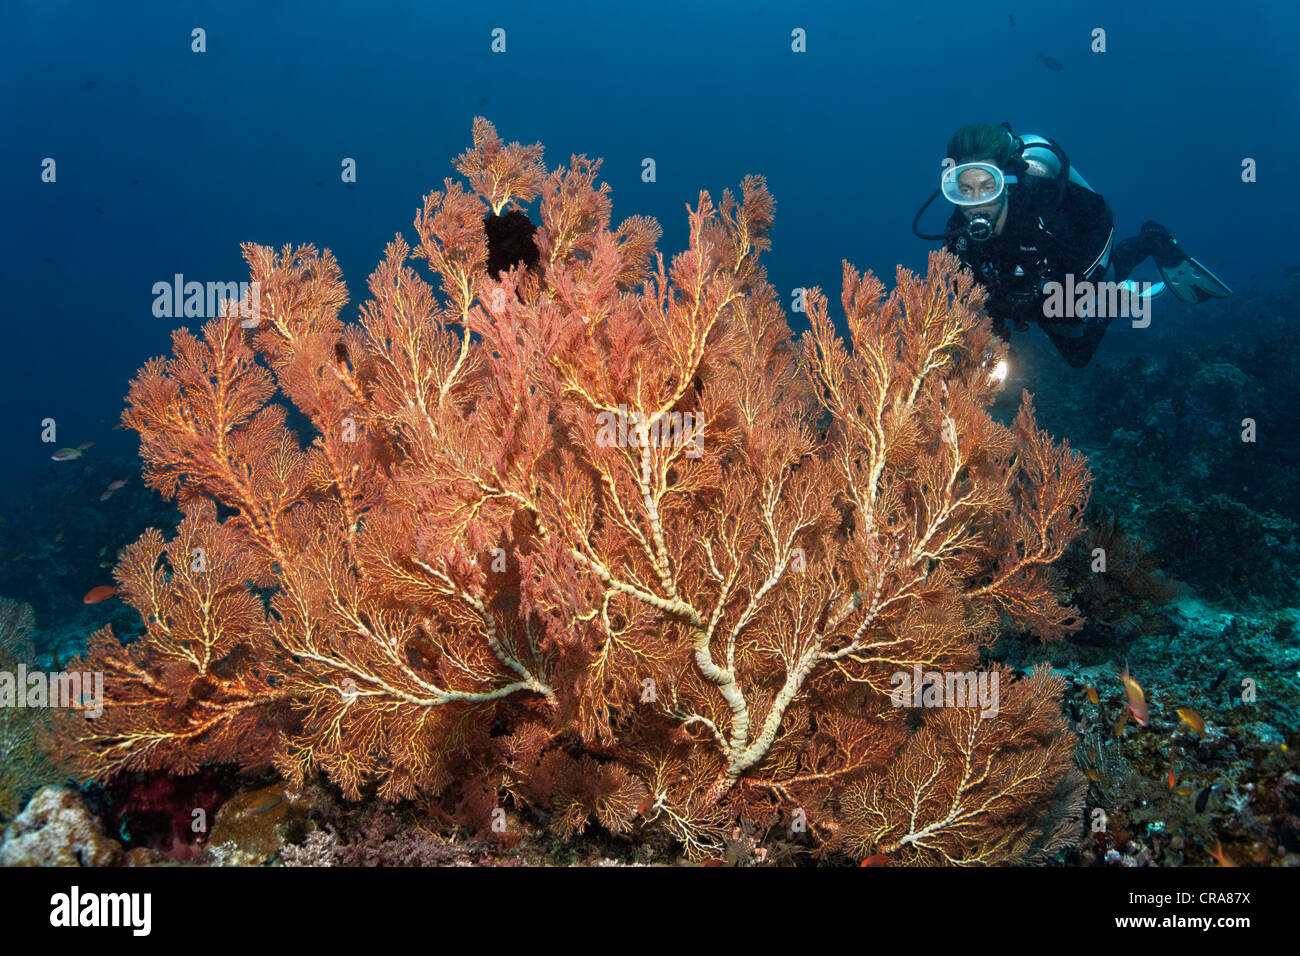 Scuba diver observing large, red Gorgonians or Sea Fans (Melithaea sp.) on a coral reef, Great Barrier Reef Stock Photo